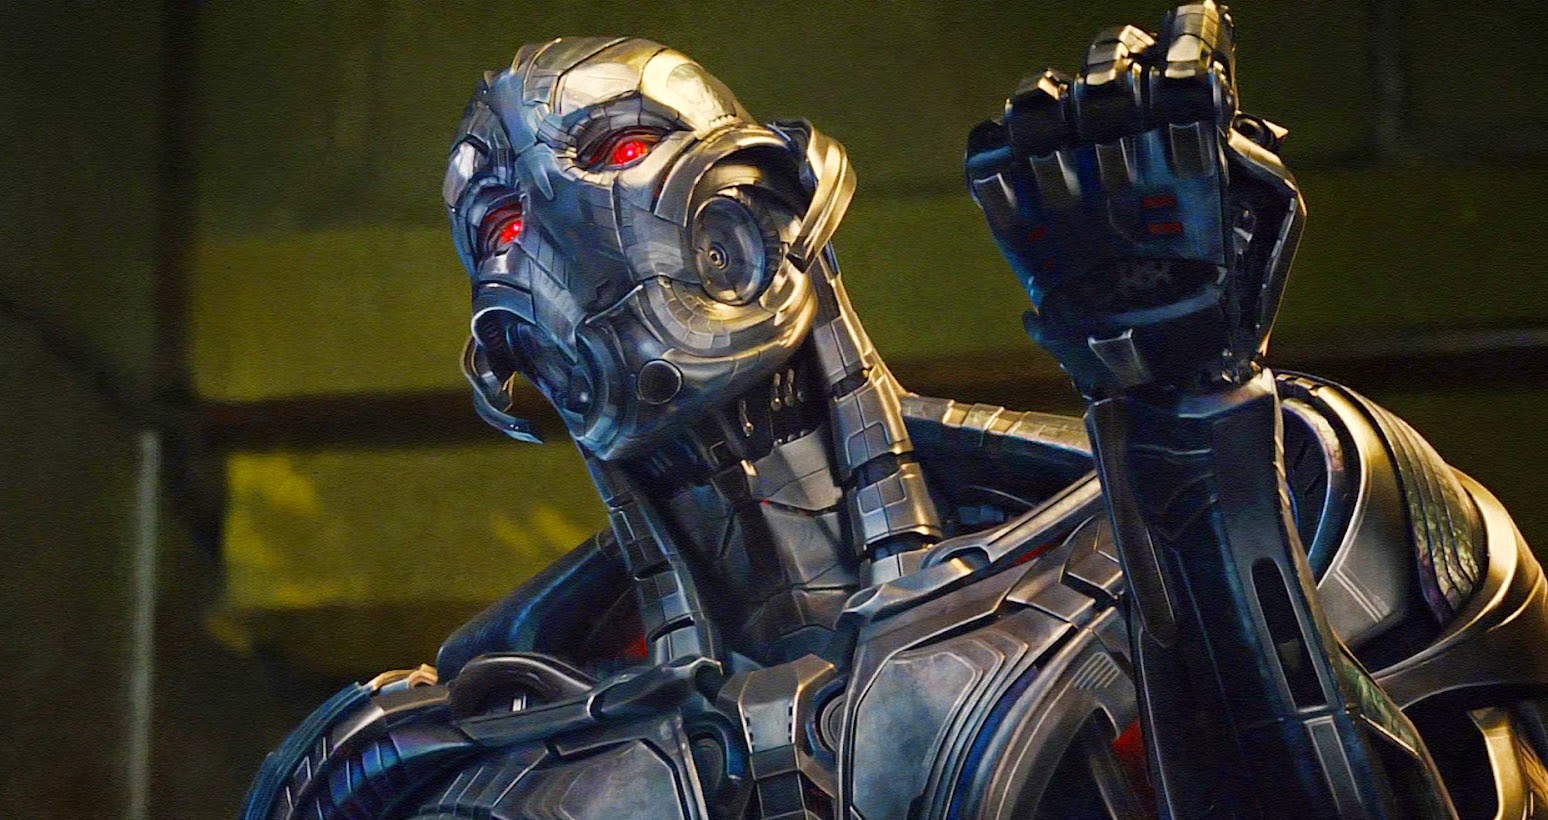 YJL's movie reviews: Movie Review: Avengers: Age of Ultron